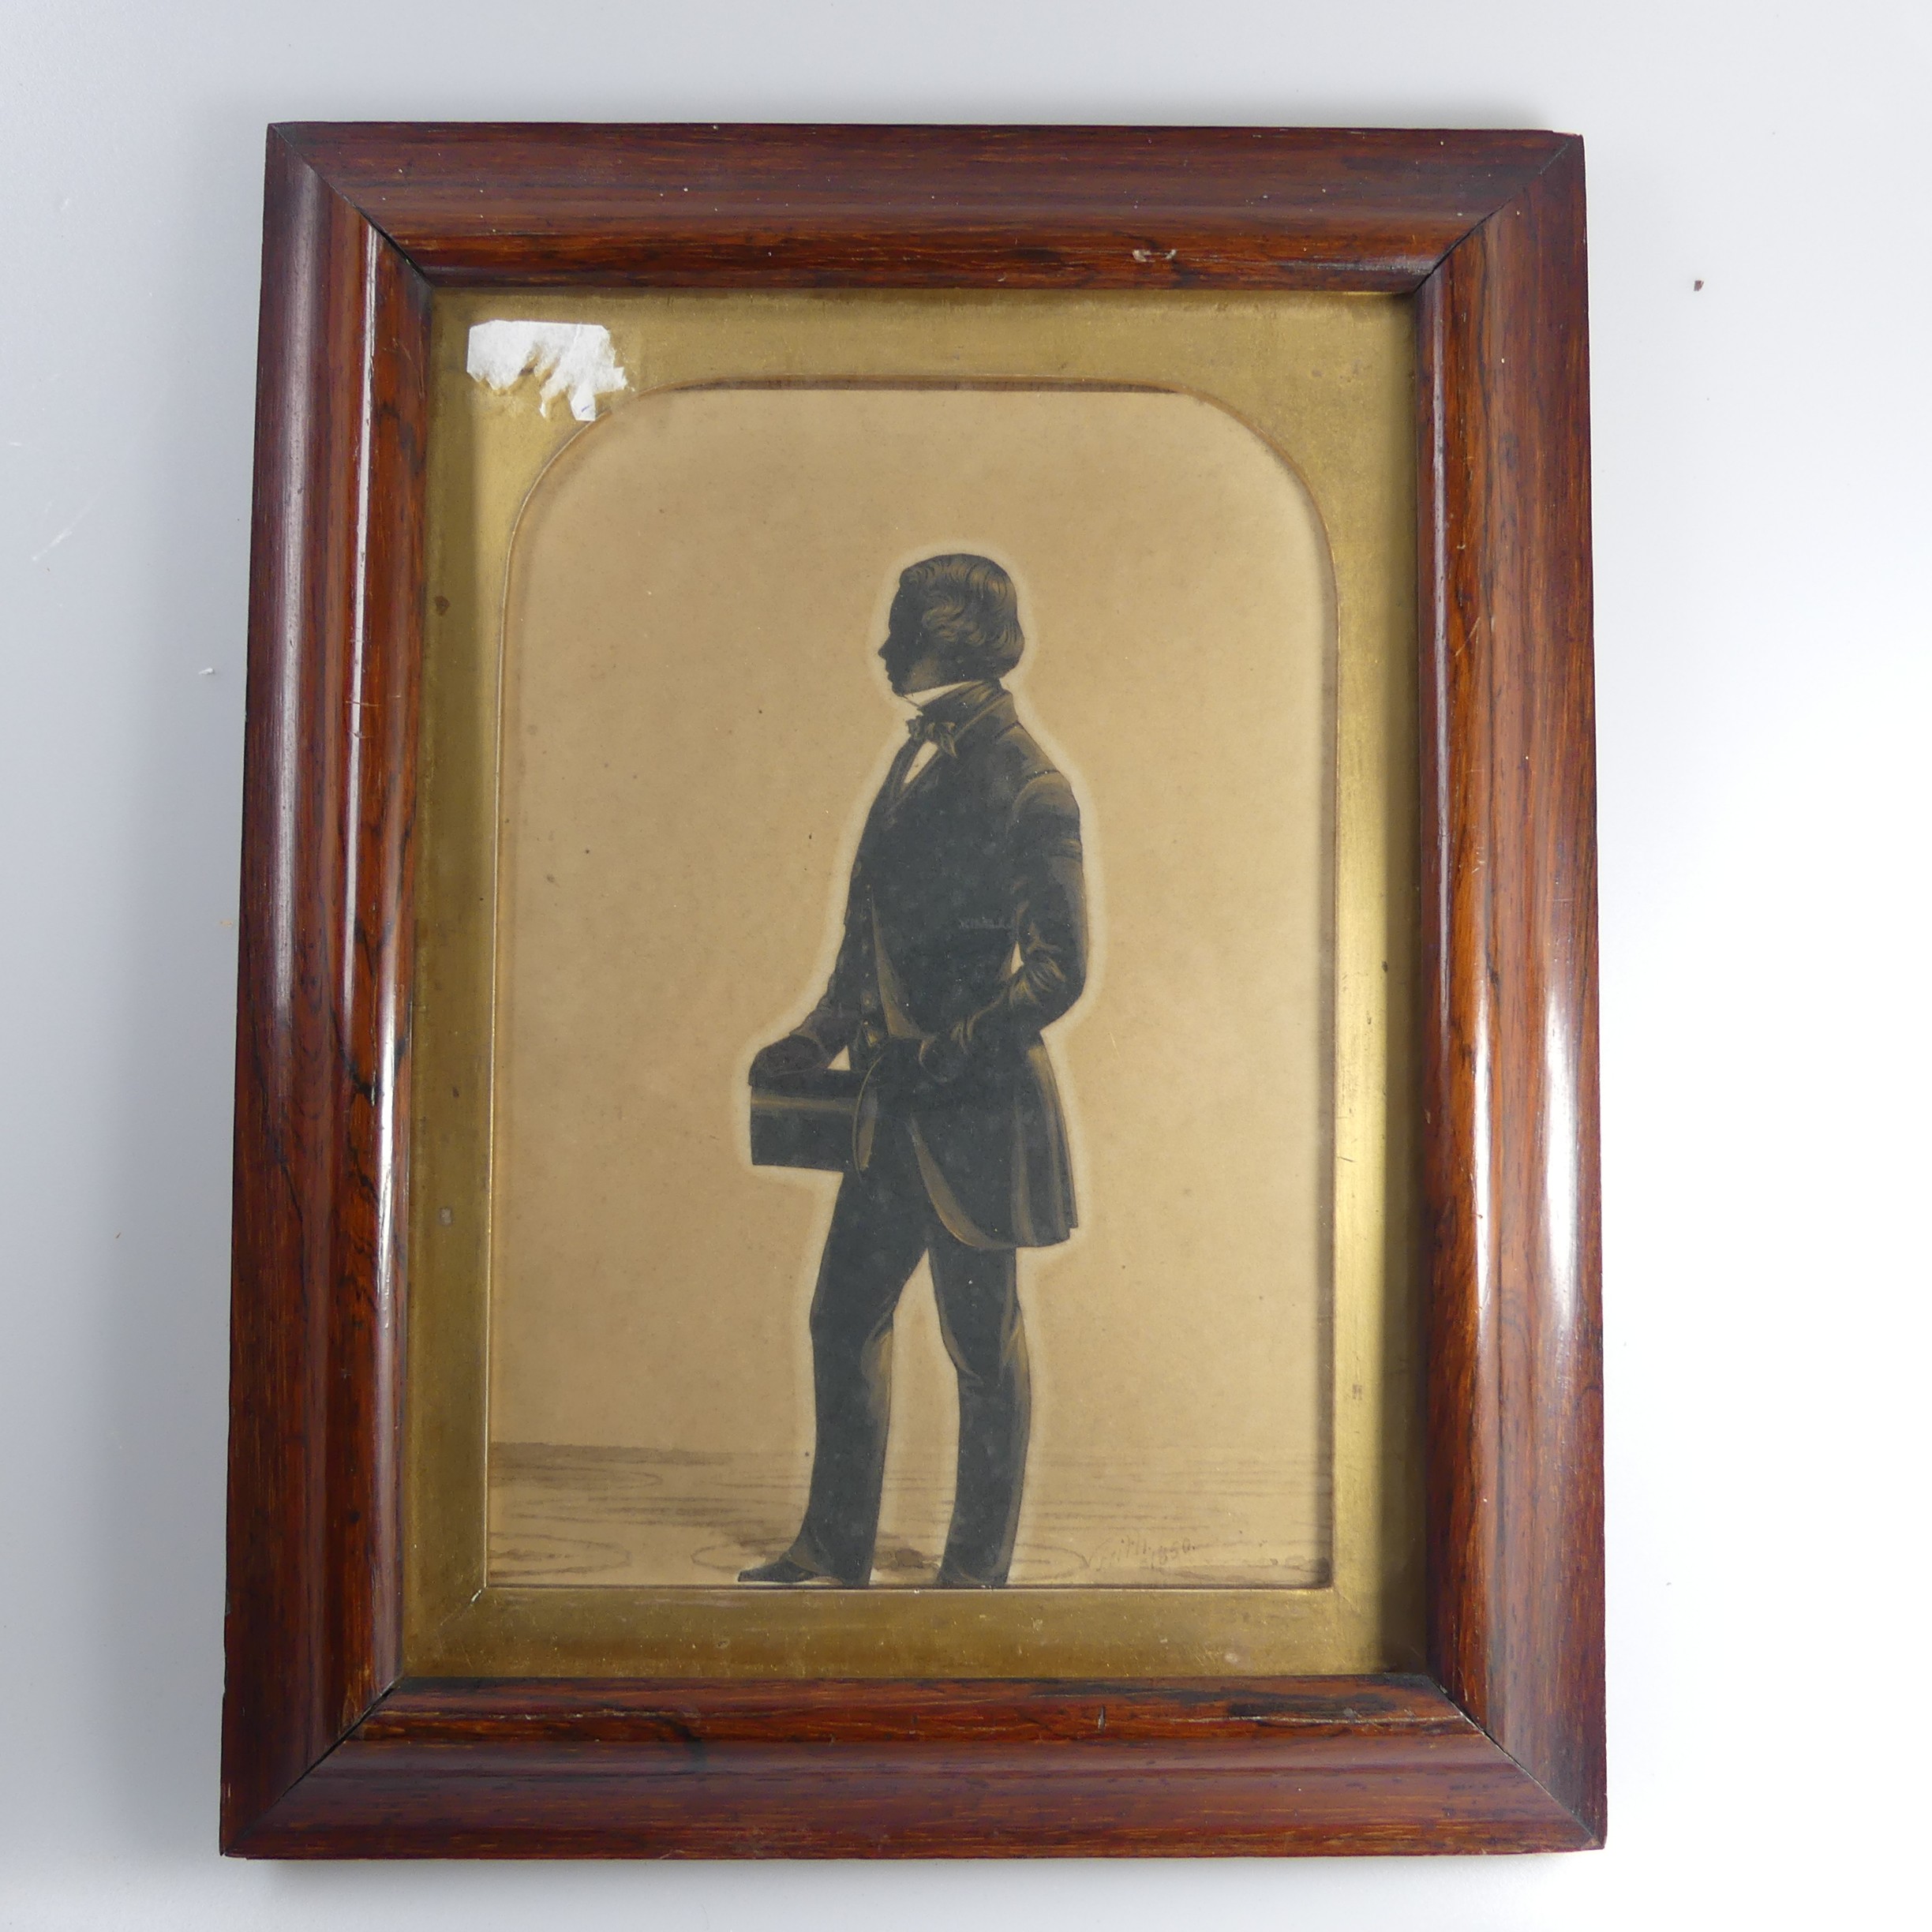 Frederick Frith (1819-1871), Silhouette portrait of a Gentleman in Top Hat, cut-out silhouette - Image 4 of 7